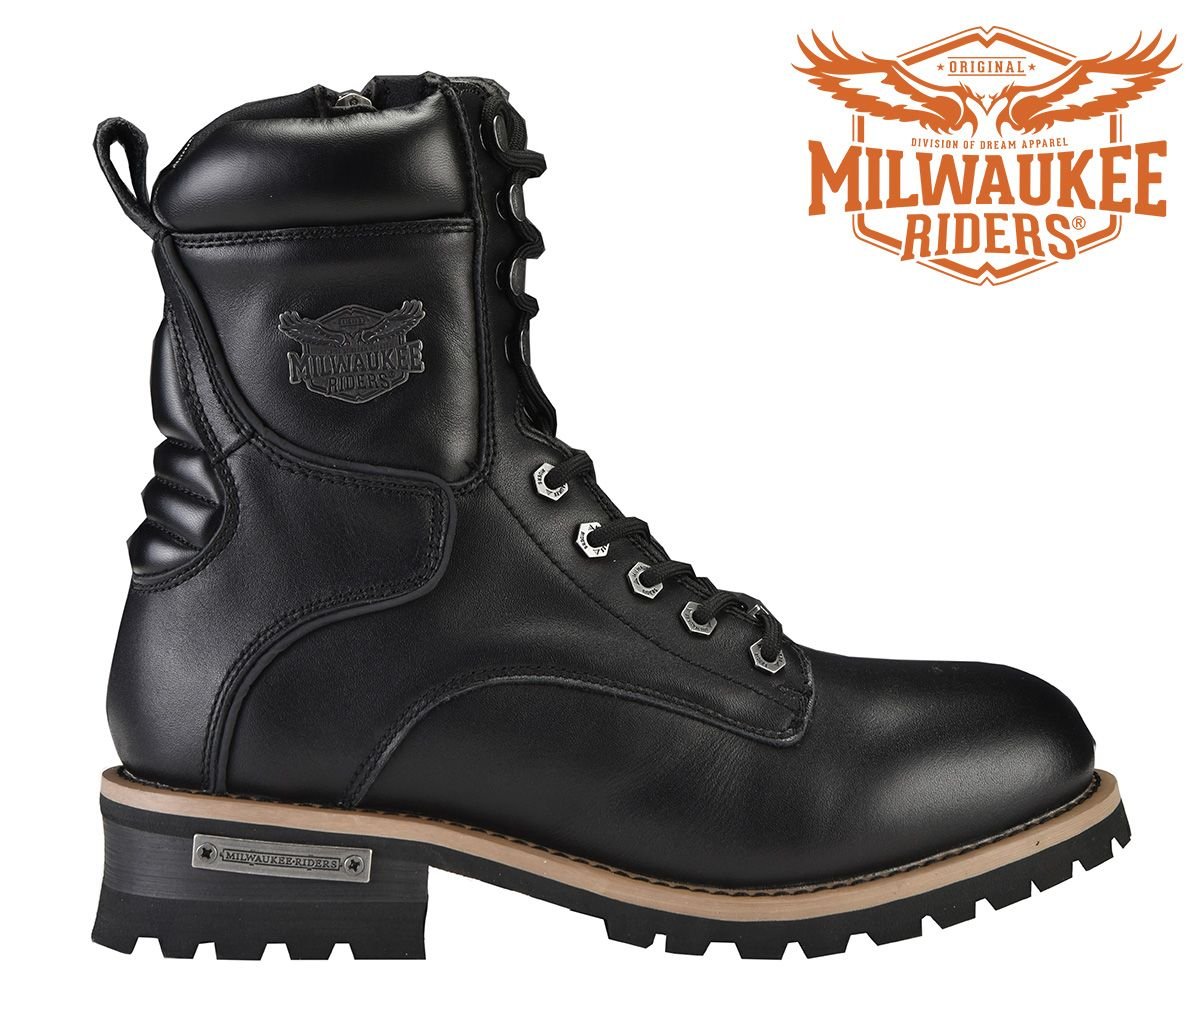 Leather Motorcycle Boots - Men's - Zipper and Lace-Up - MR-BTM8002-DL